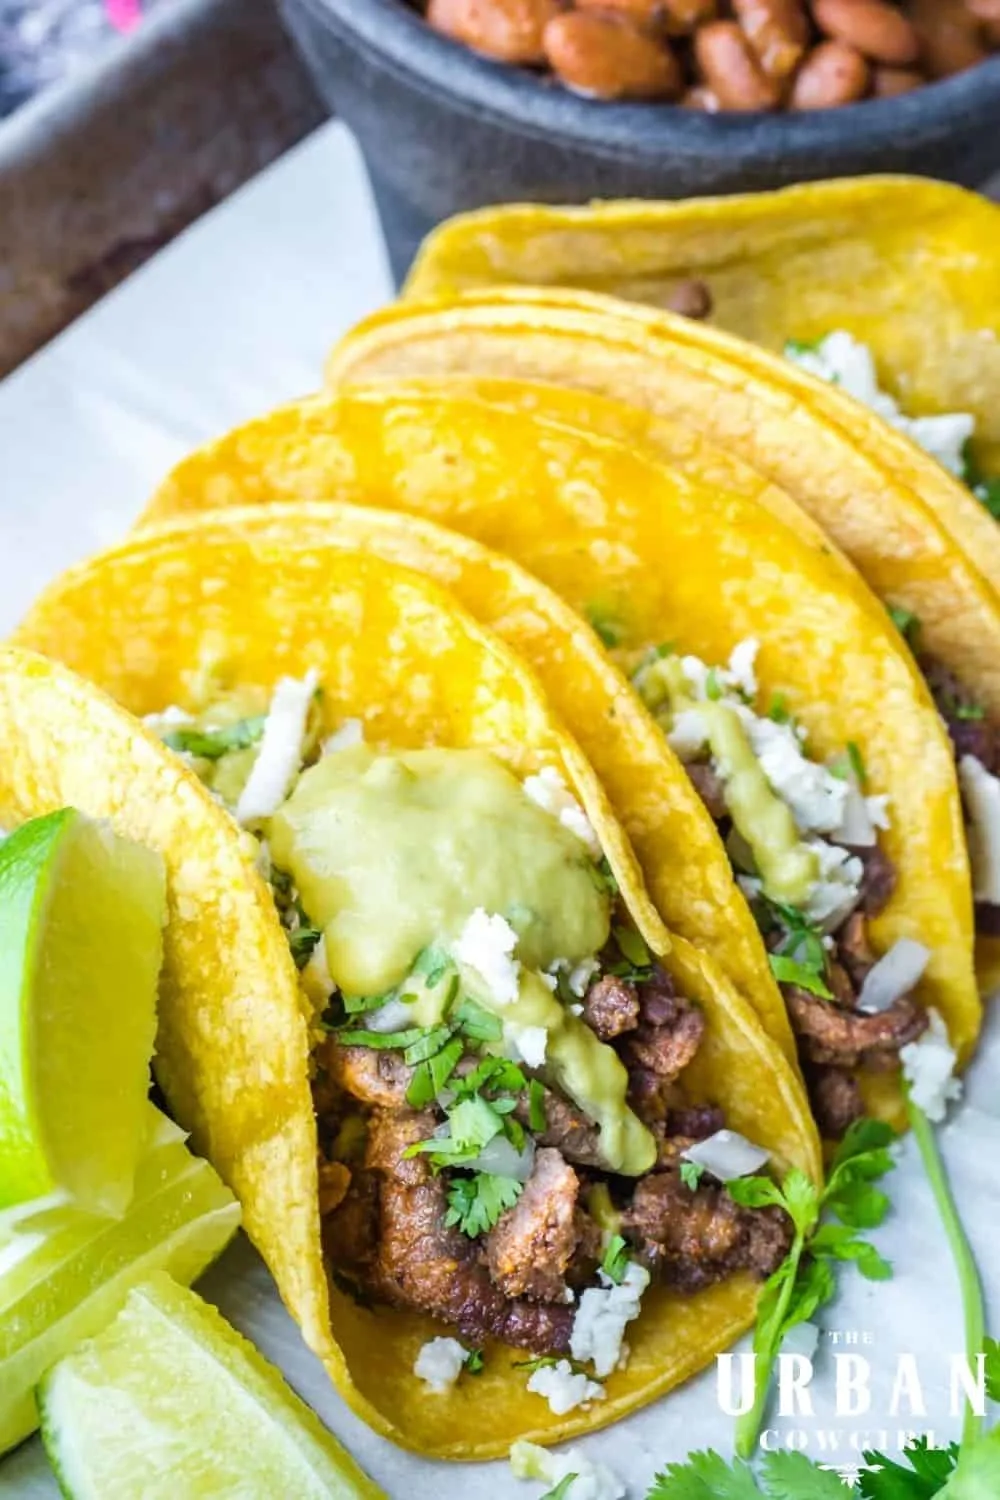 A pan of steak street tacos covered in a creamy jalapeno sauce with cheese and limes